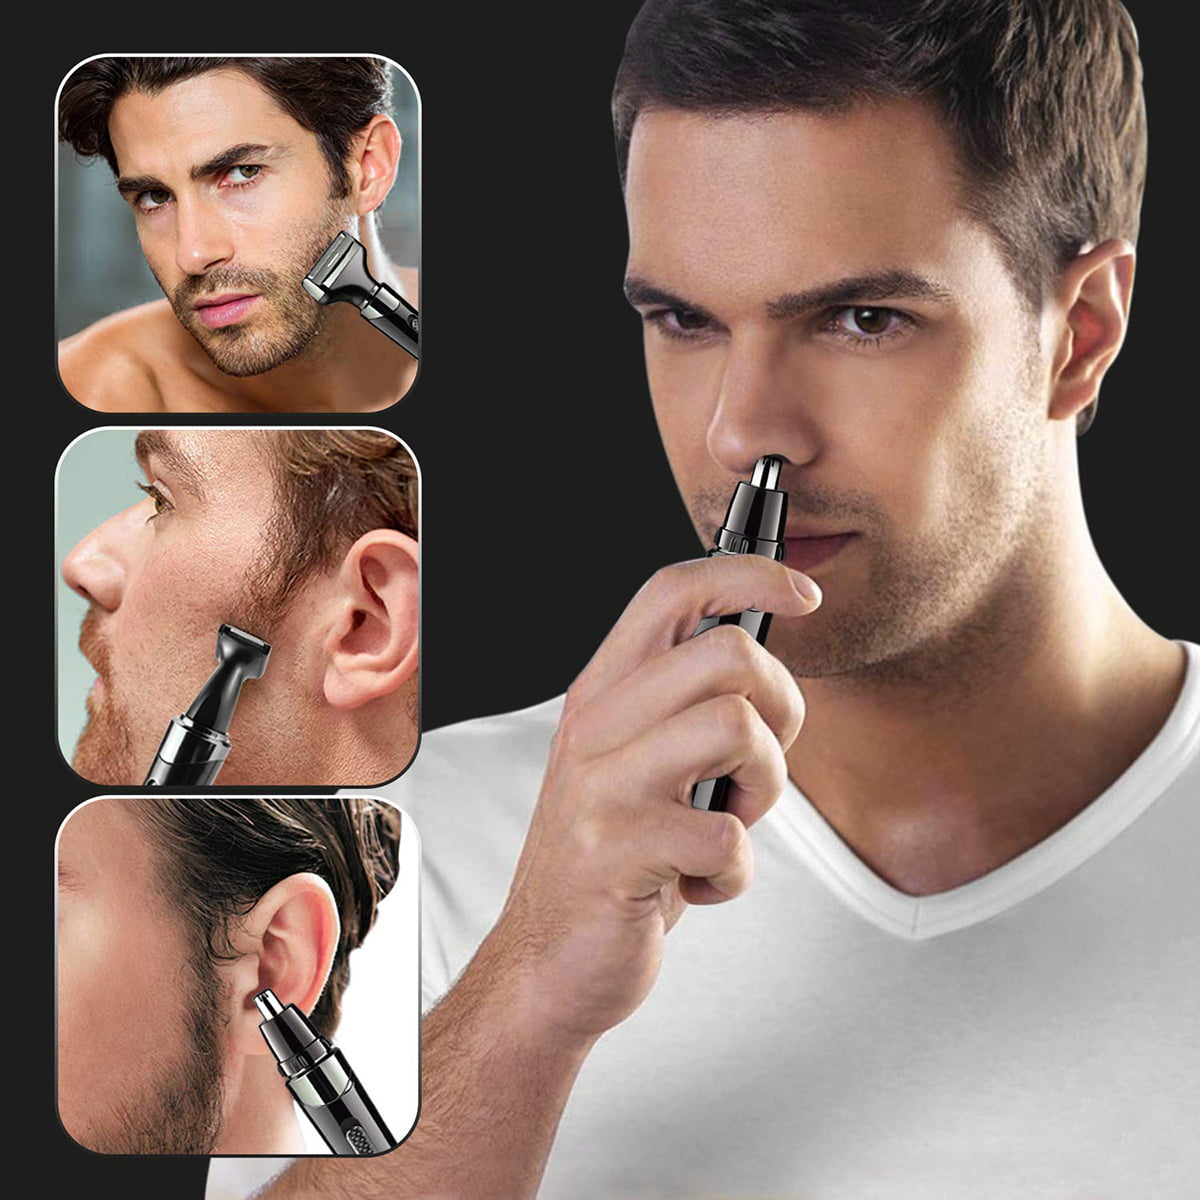 4-in-1 Waterproof Electric Shaver for Men and Women